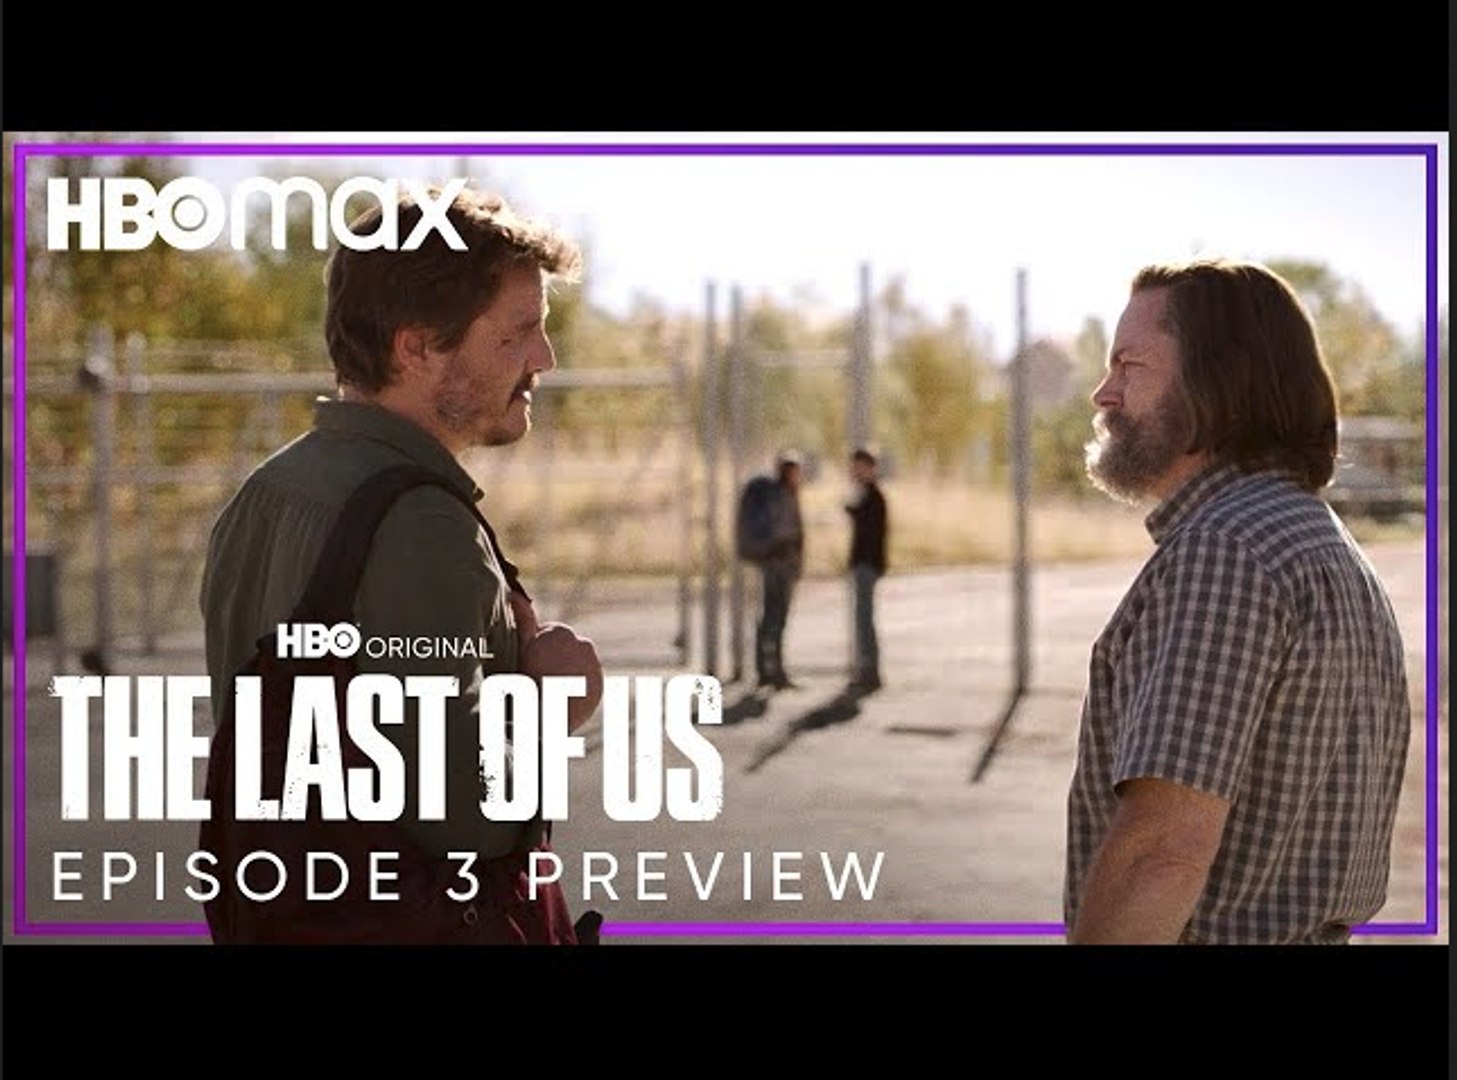 The Last of Us EPISODE 4 NEW TRAILER - HBO Max - video Dailymotion